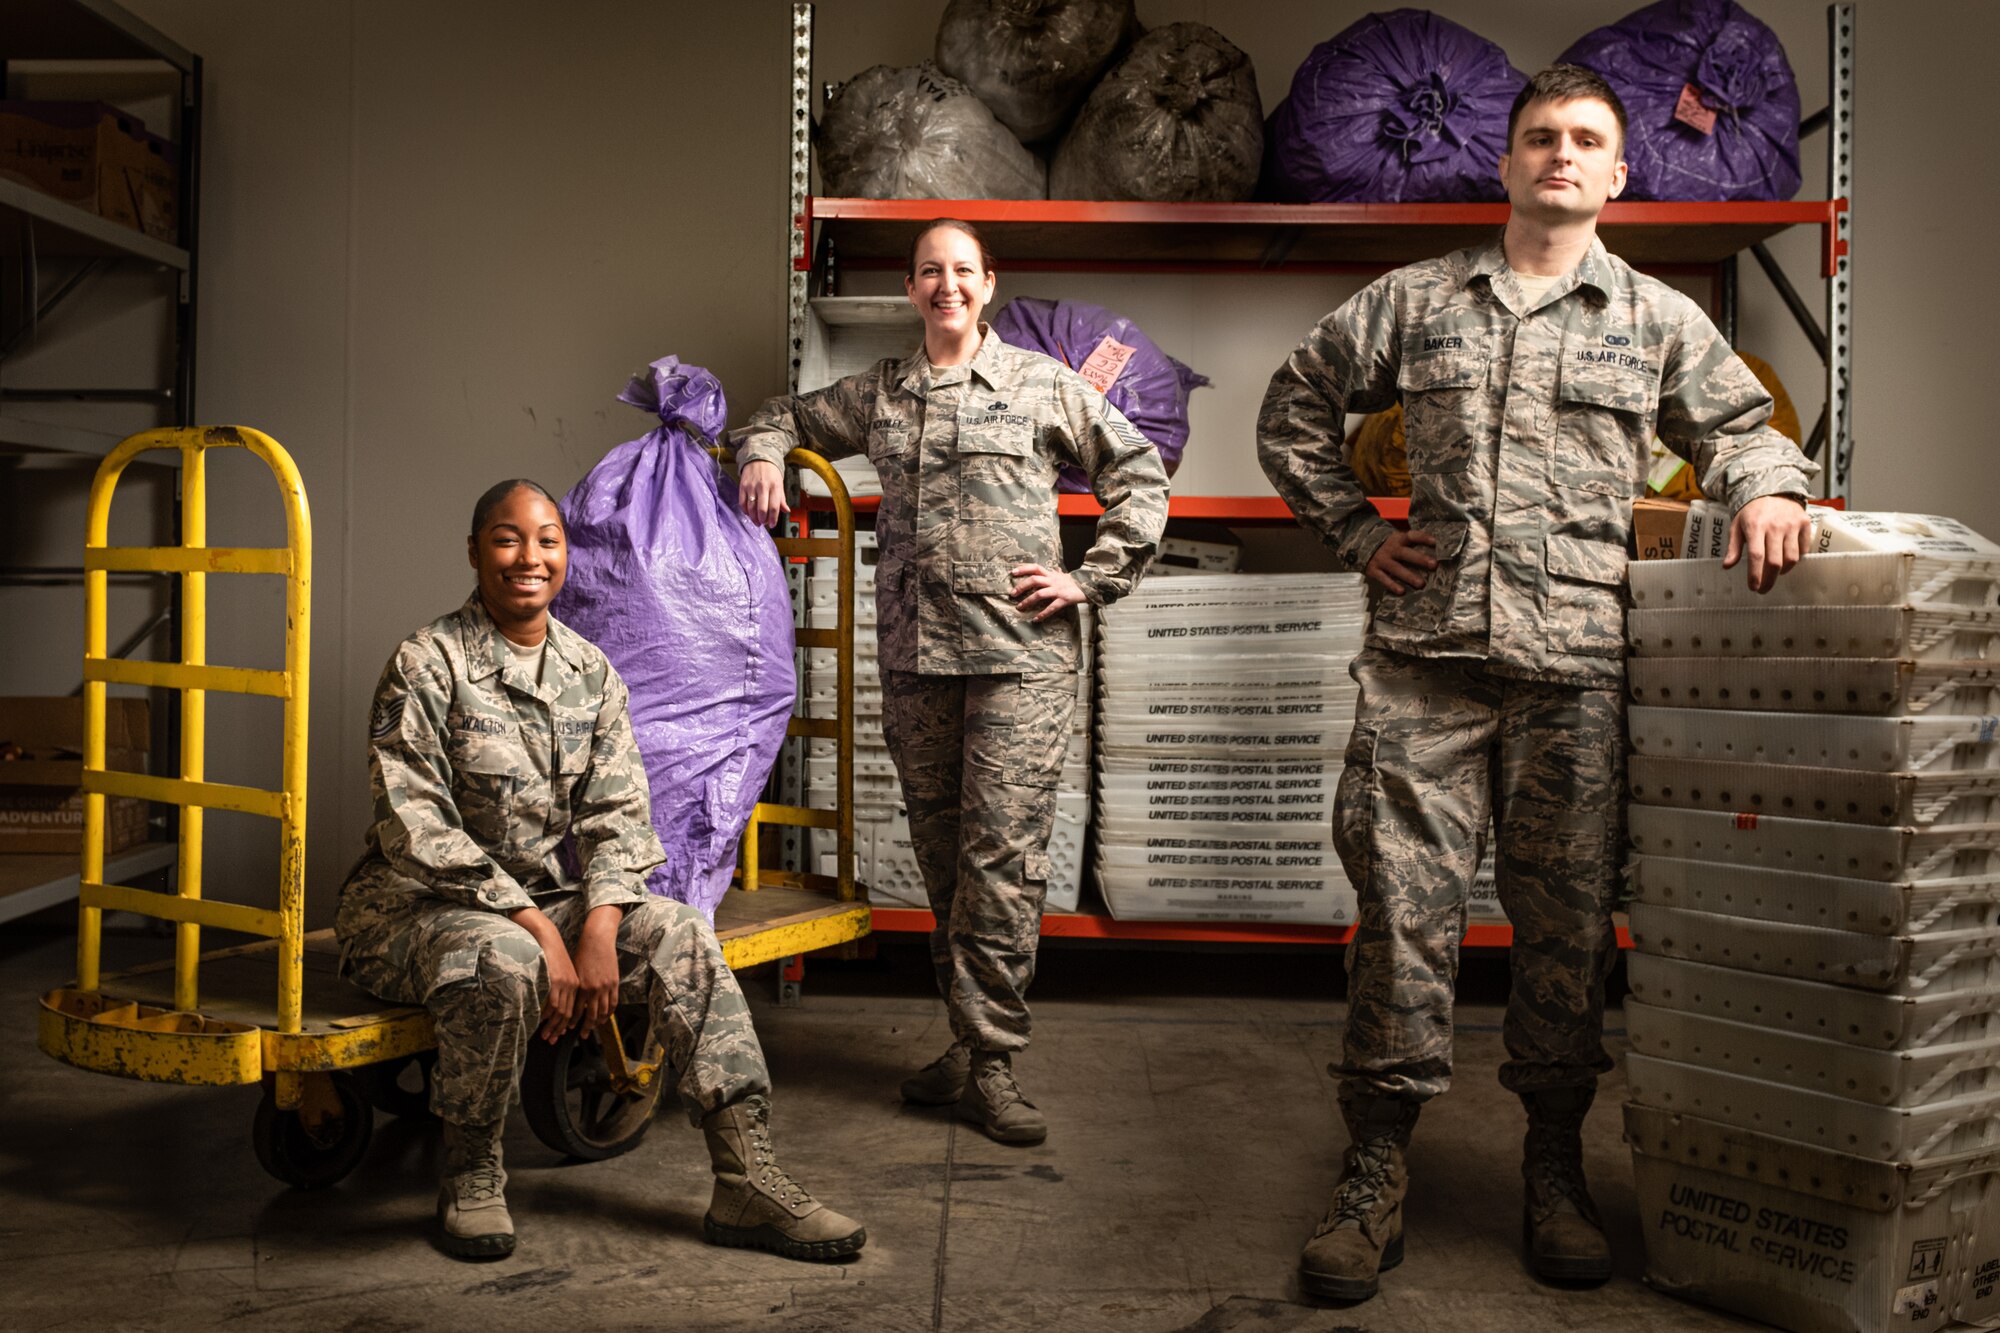 Members of the Pacific Air Forces Air Postal Squadron Detachment 4 pose for a group photo in this composite image in Sydney August 24, 2019. The detachment is responsible for delivering mail to government employees and their families located across an area of more than 3 million square miles. (U.S. Air Force Photo Illustration by Master Sgt. Benjamin Wilson)